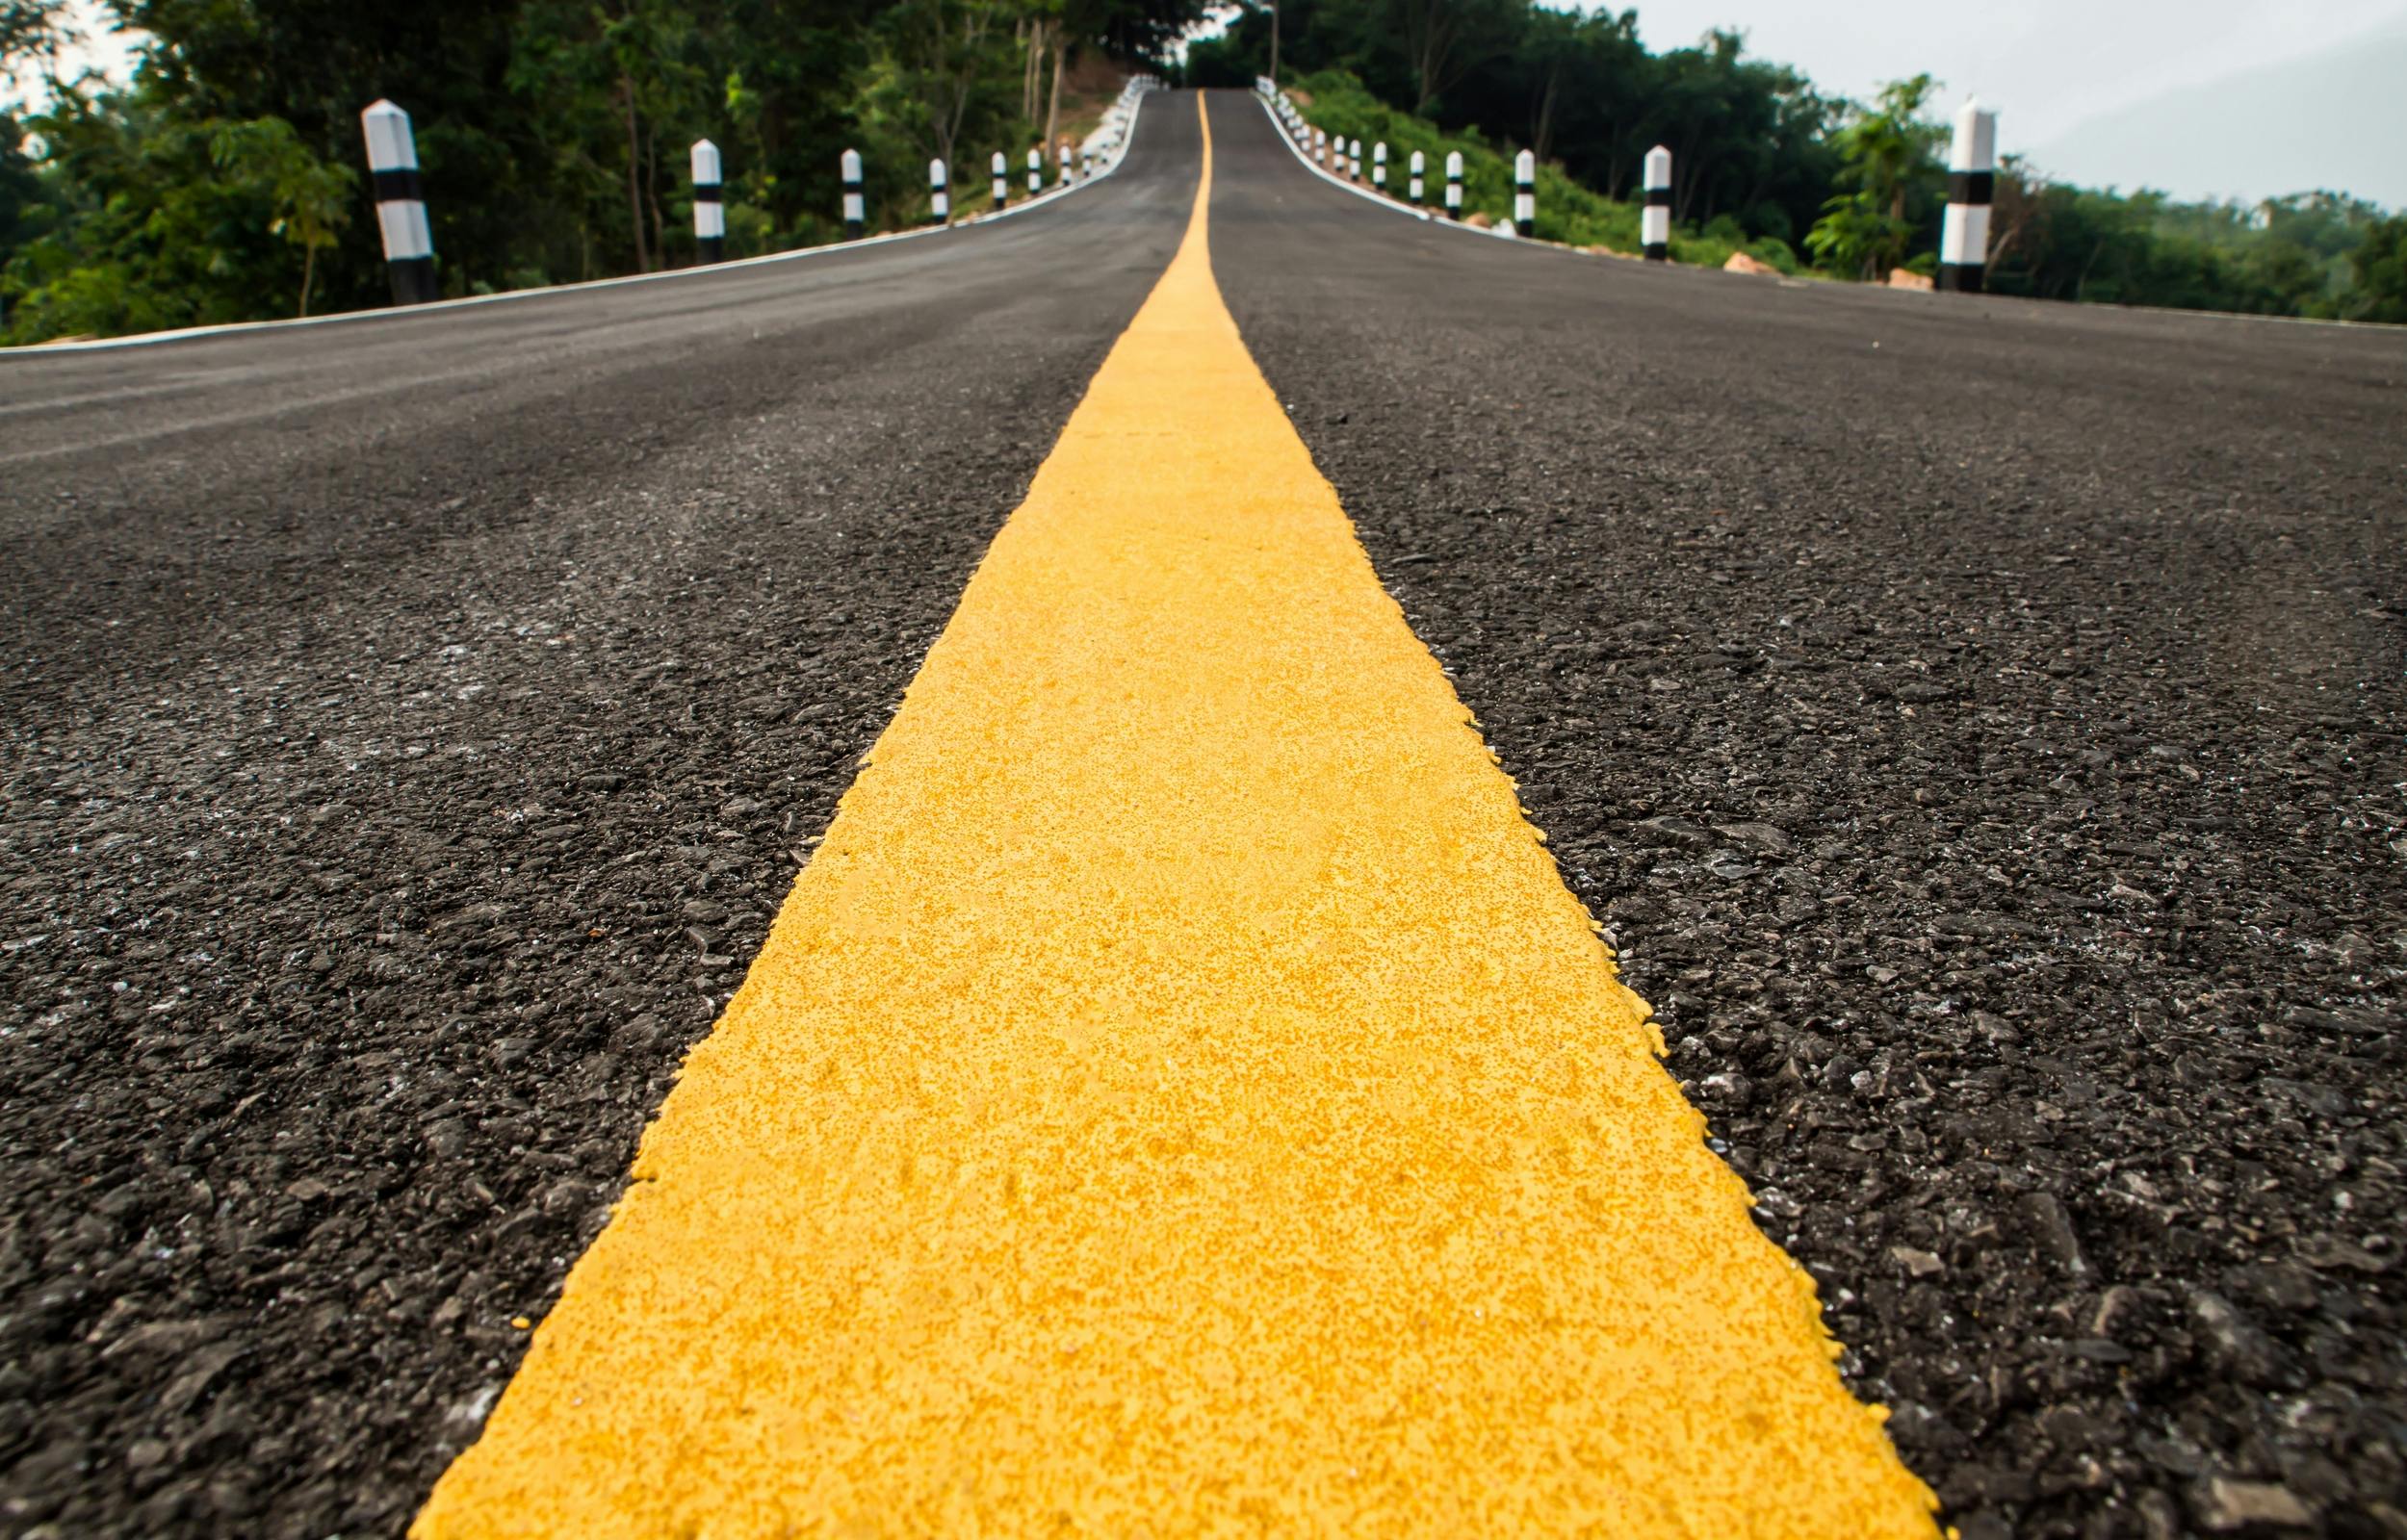 Street level view of a yellow middle line disappearing down an asphalt road into the distance.